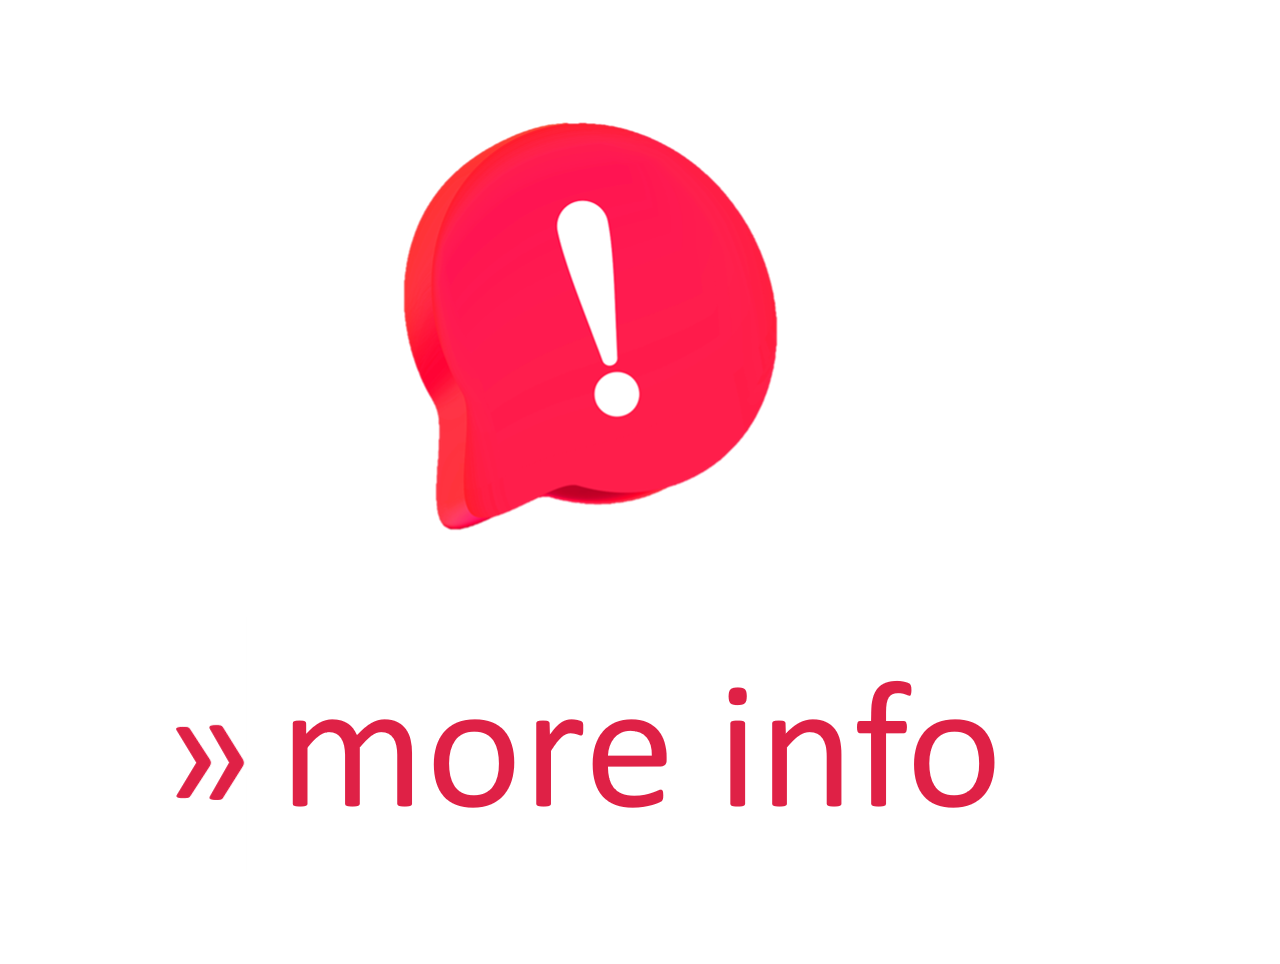 Speech bubble with exclamation mark with text "more info"